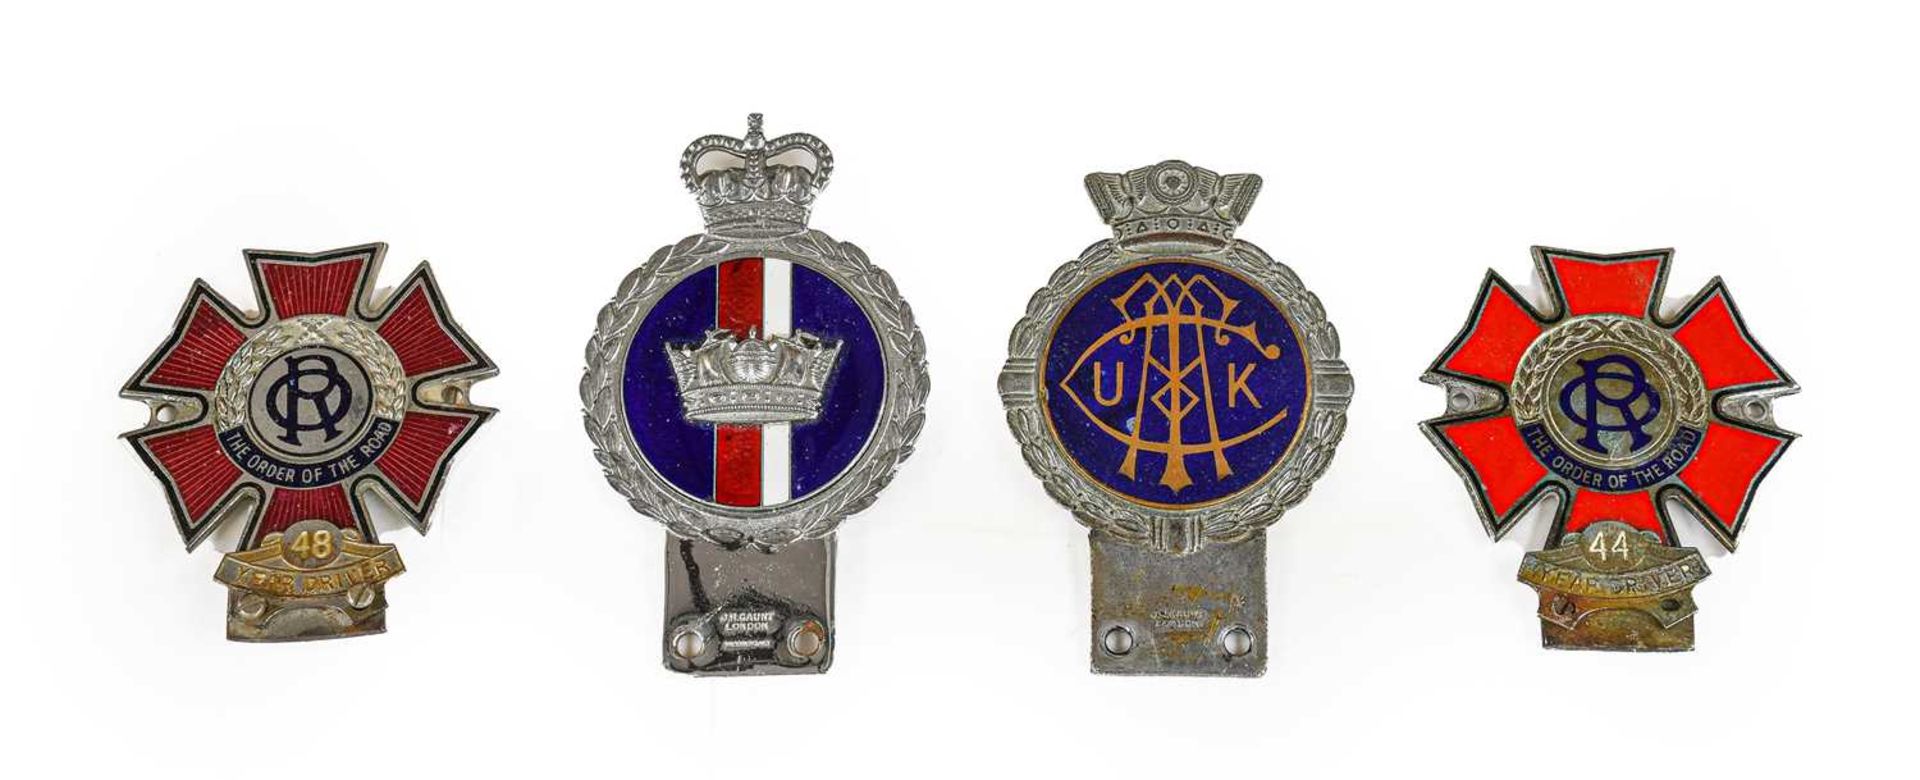 J R Gaunt, London: A Chrome Plated and Enamelled Car Badge, surmounted by a crown; A JR Gaunt Blue